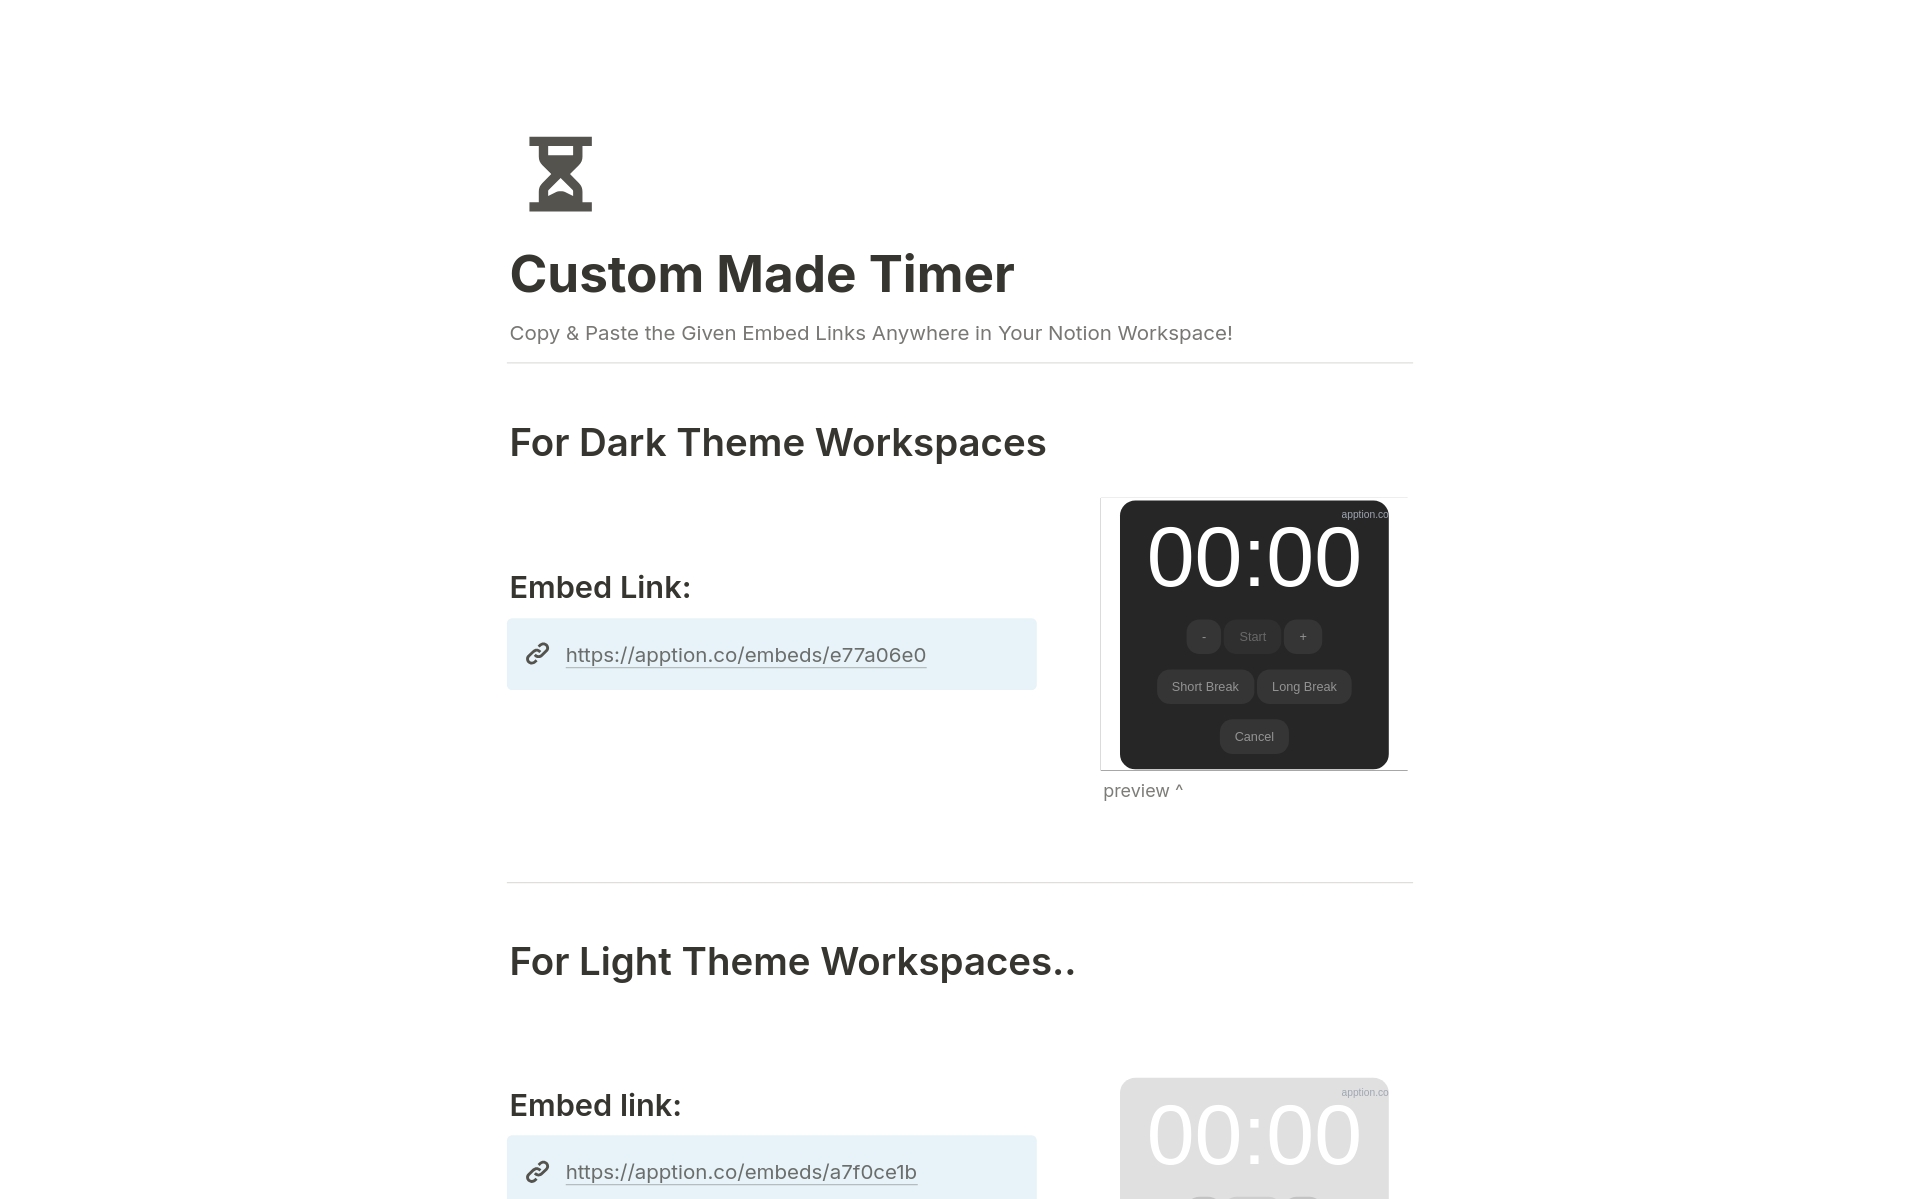 Dark Theme and Light Theme custom-made timers for your Notion workspace. Boost your workflow with sleek designs optimized to your preference!